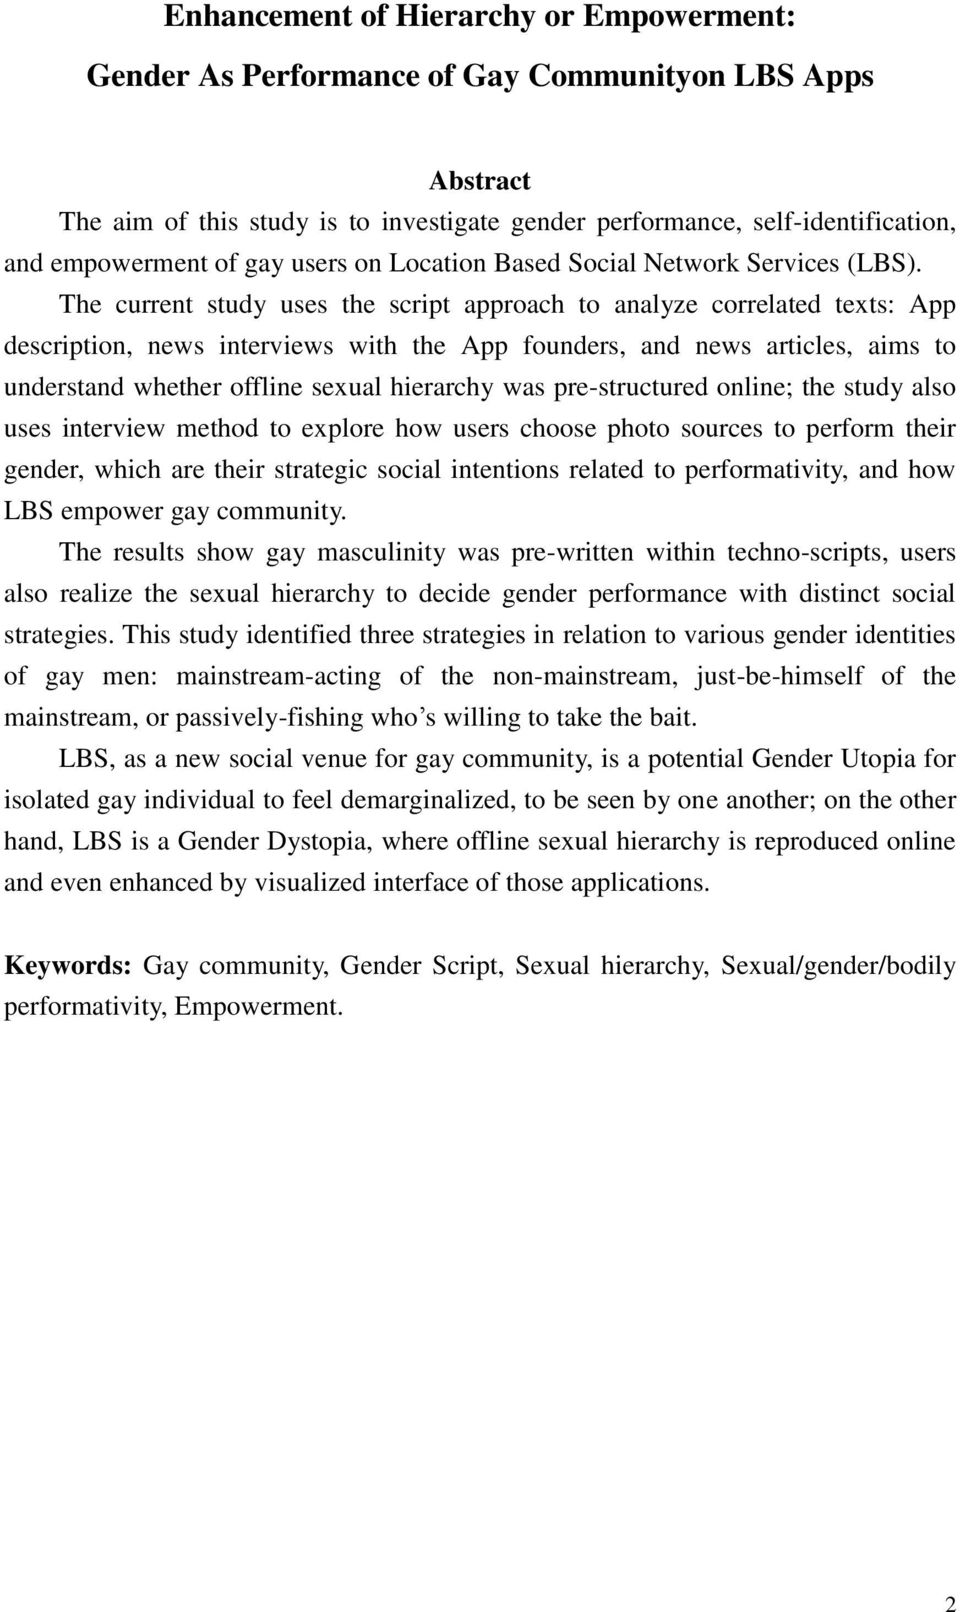 The current study uses the script approach to analyze correlated texts: App description, news interviews with the App founders, and news articles, aims to understand whether offline sexual hierarchy